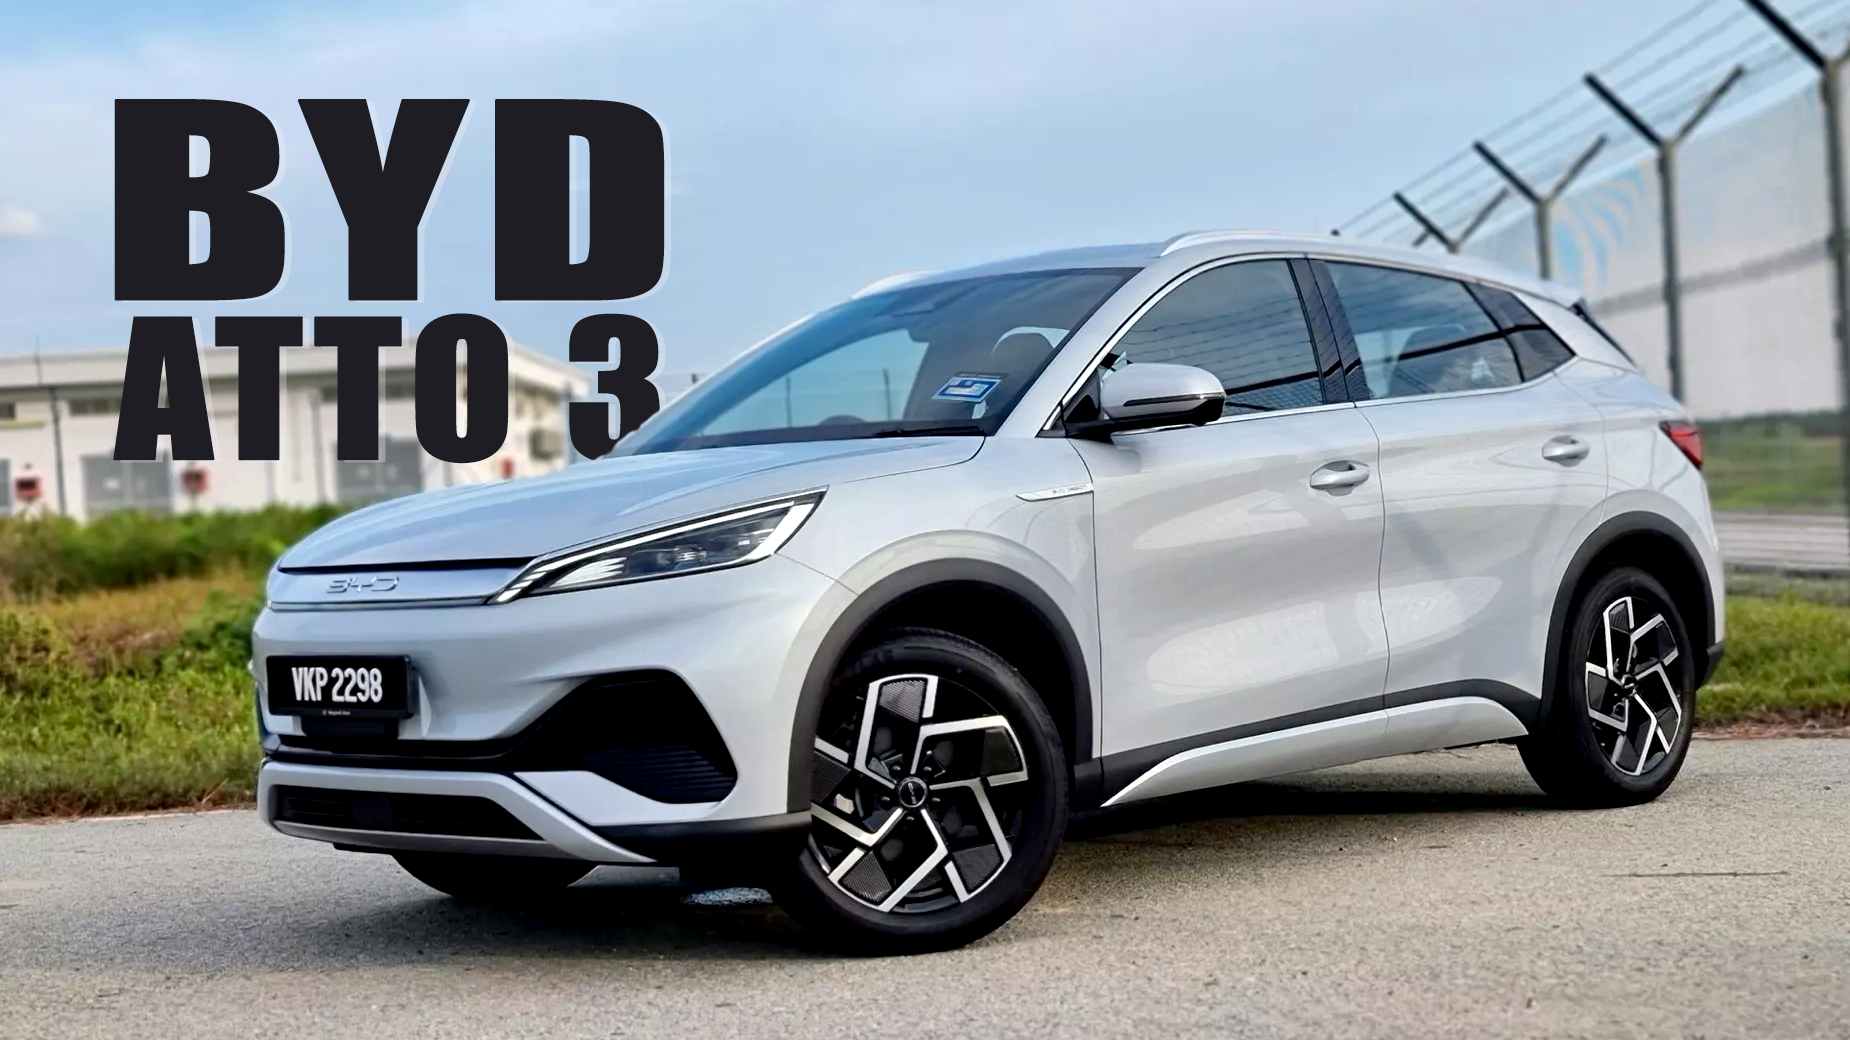 BYD Atto 3 review: The biggest-selling car you've never heard of? 